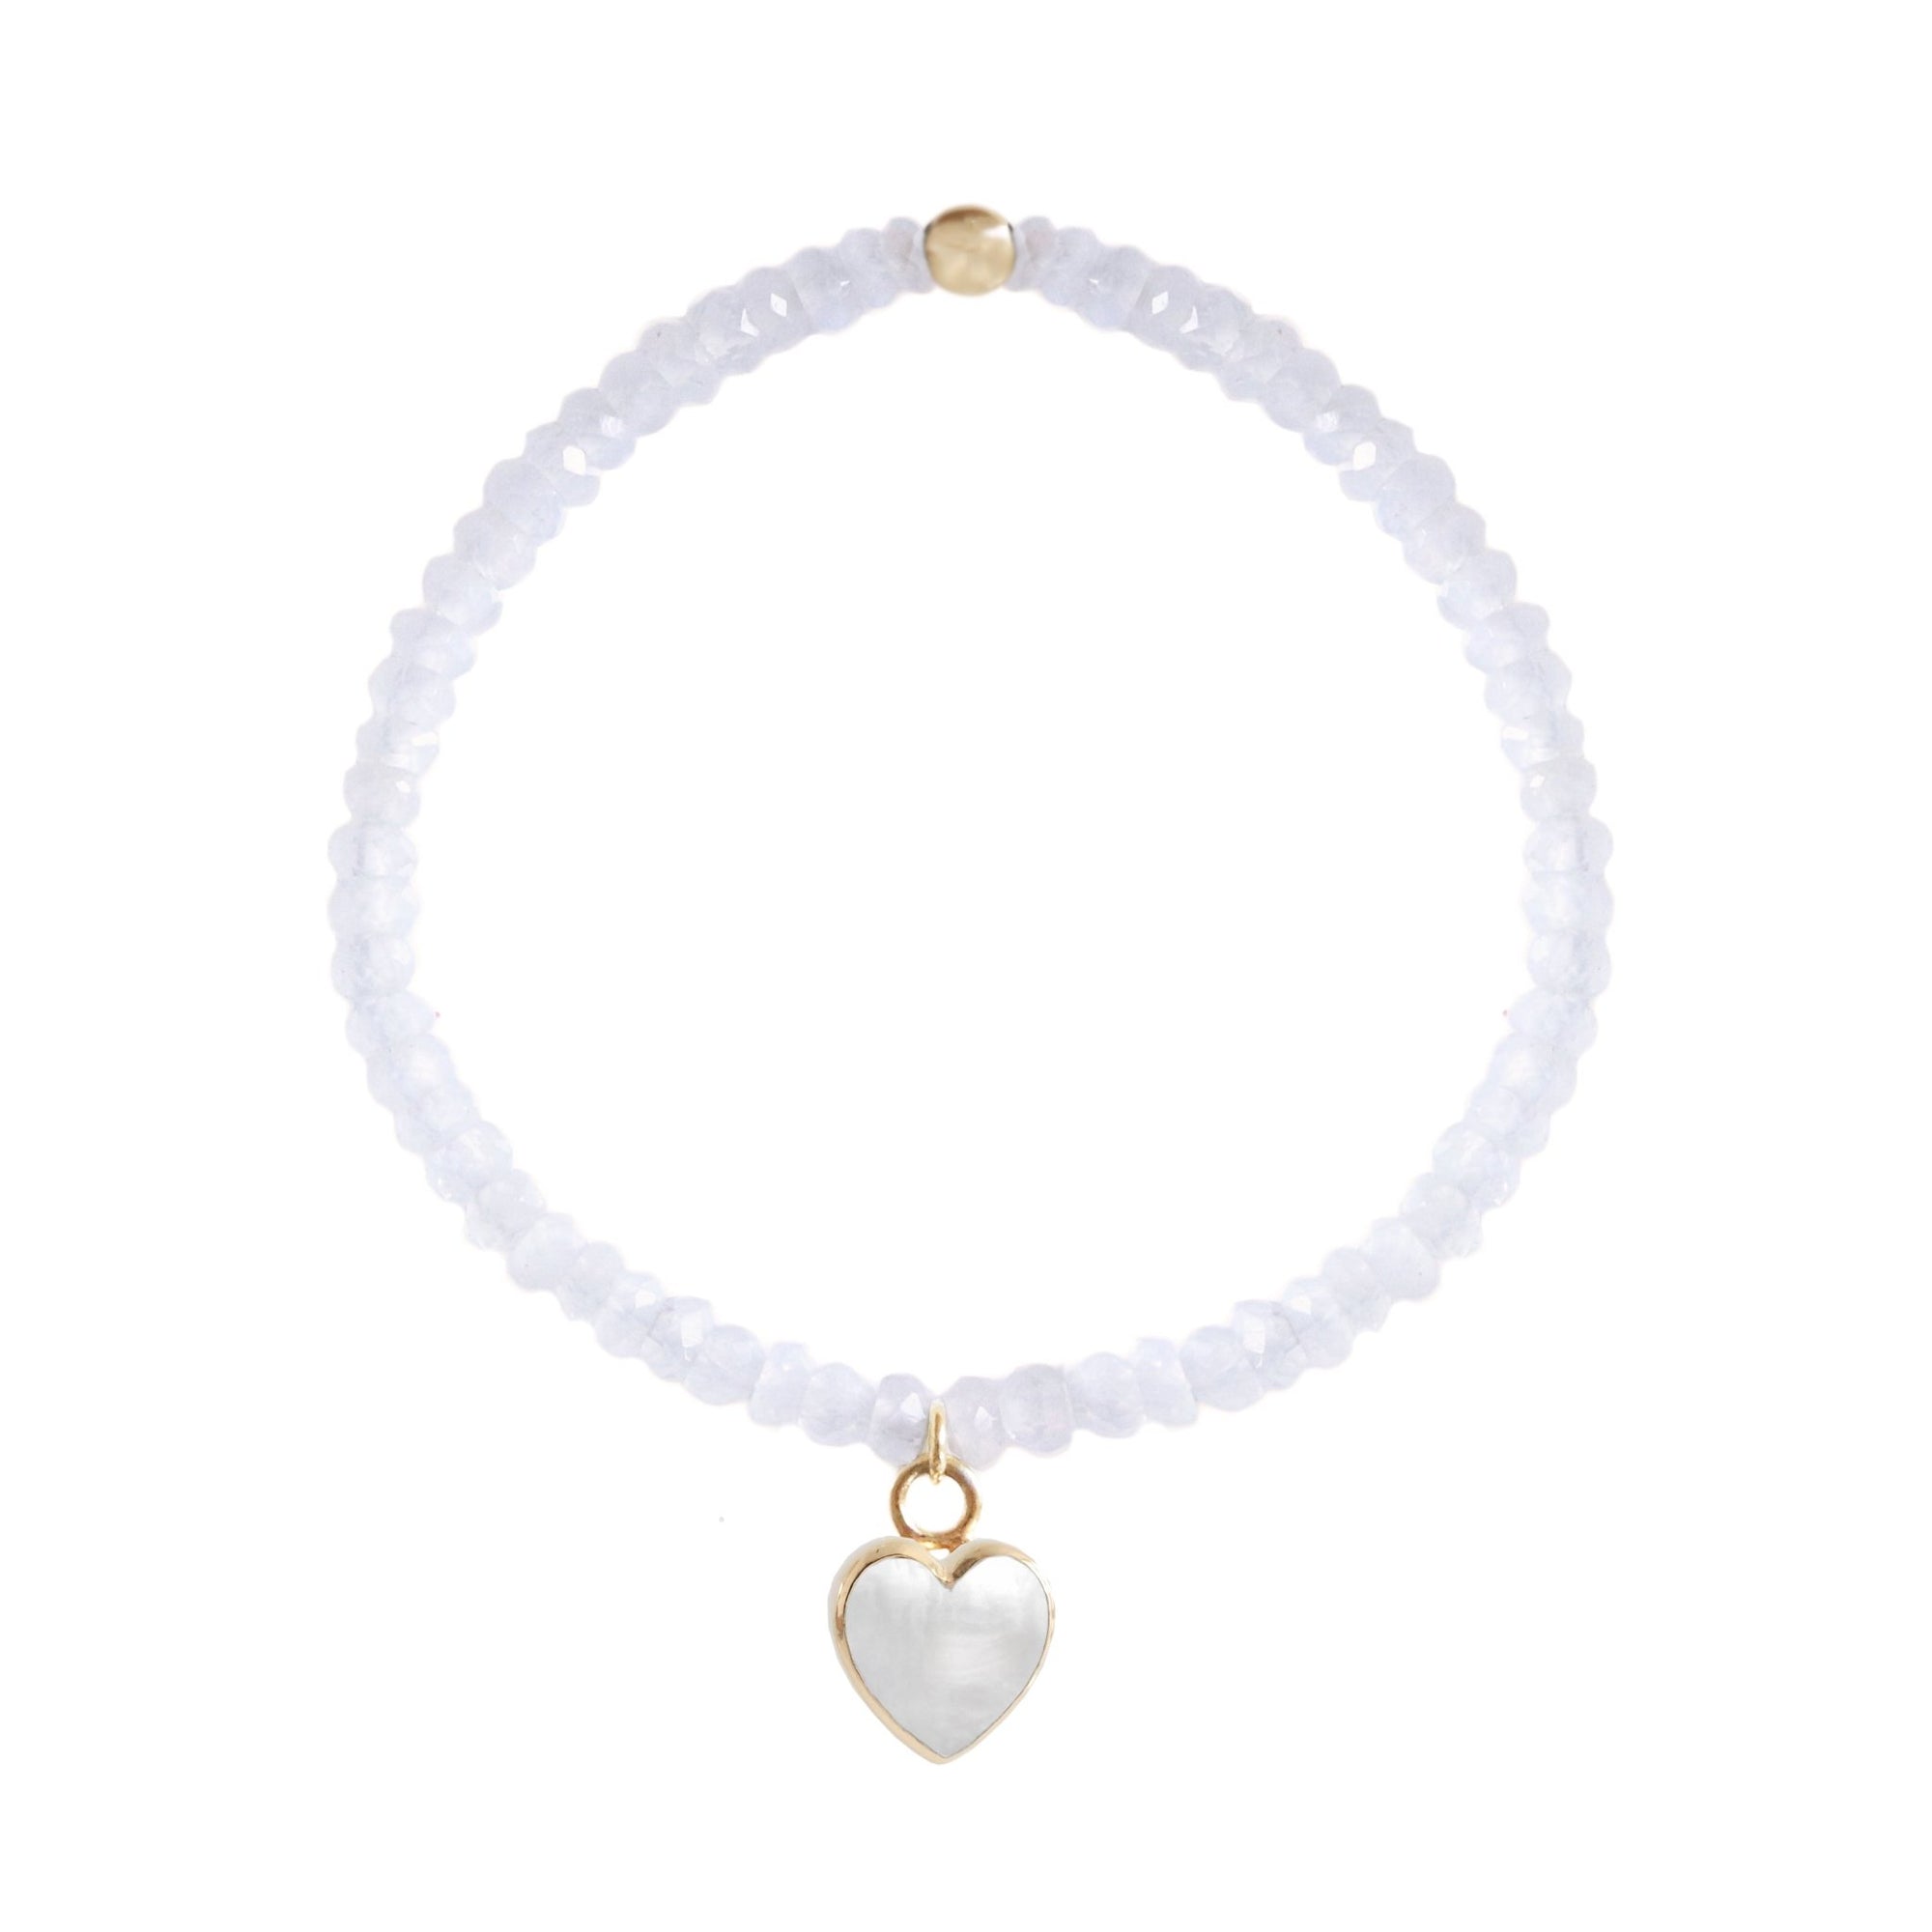 FRAICHE INSPIRE SWEETHEART STRETCH BRACELET - MOONSTONE, MOTHER OF PEARL & GOLD - SO PRETTY CARA COTTER